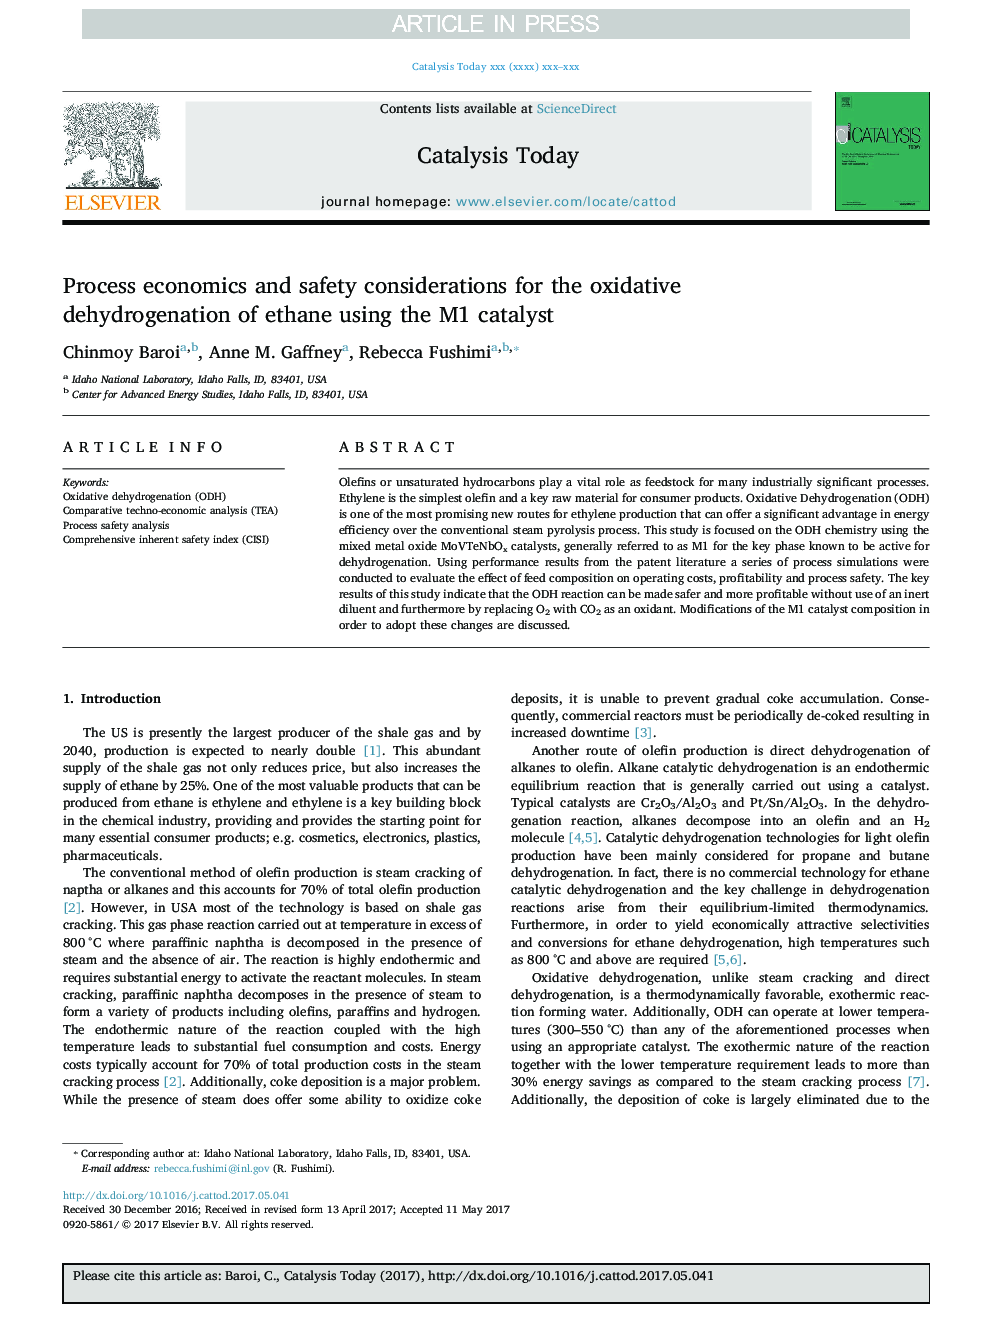 Process economics and safety considerations for the oxidative dehydrogenation of ethane using the M1 catalyst